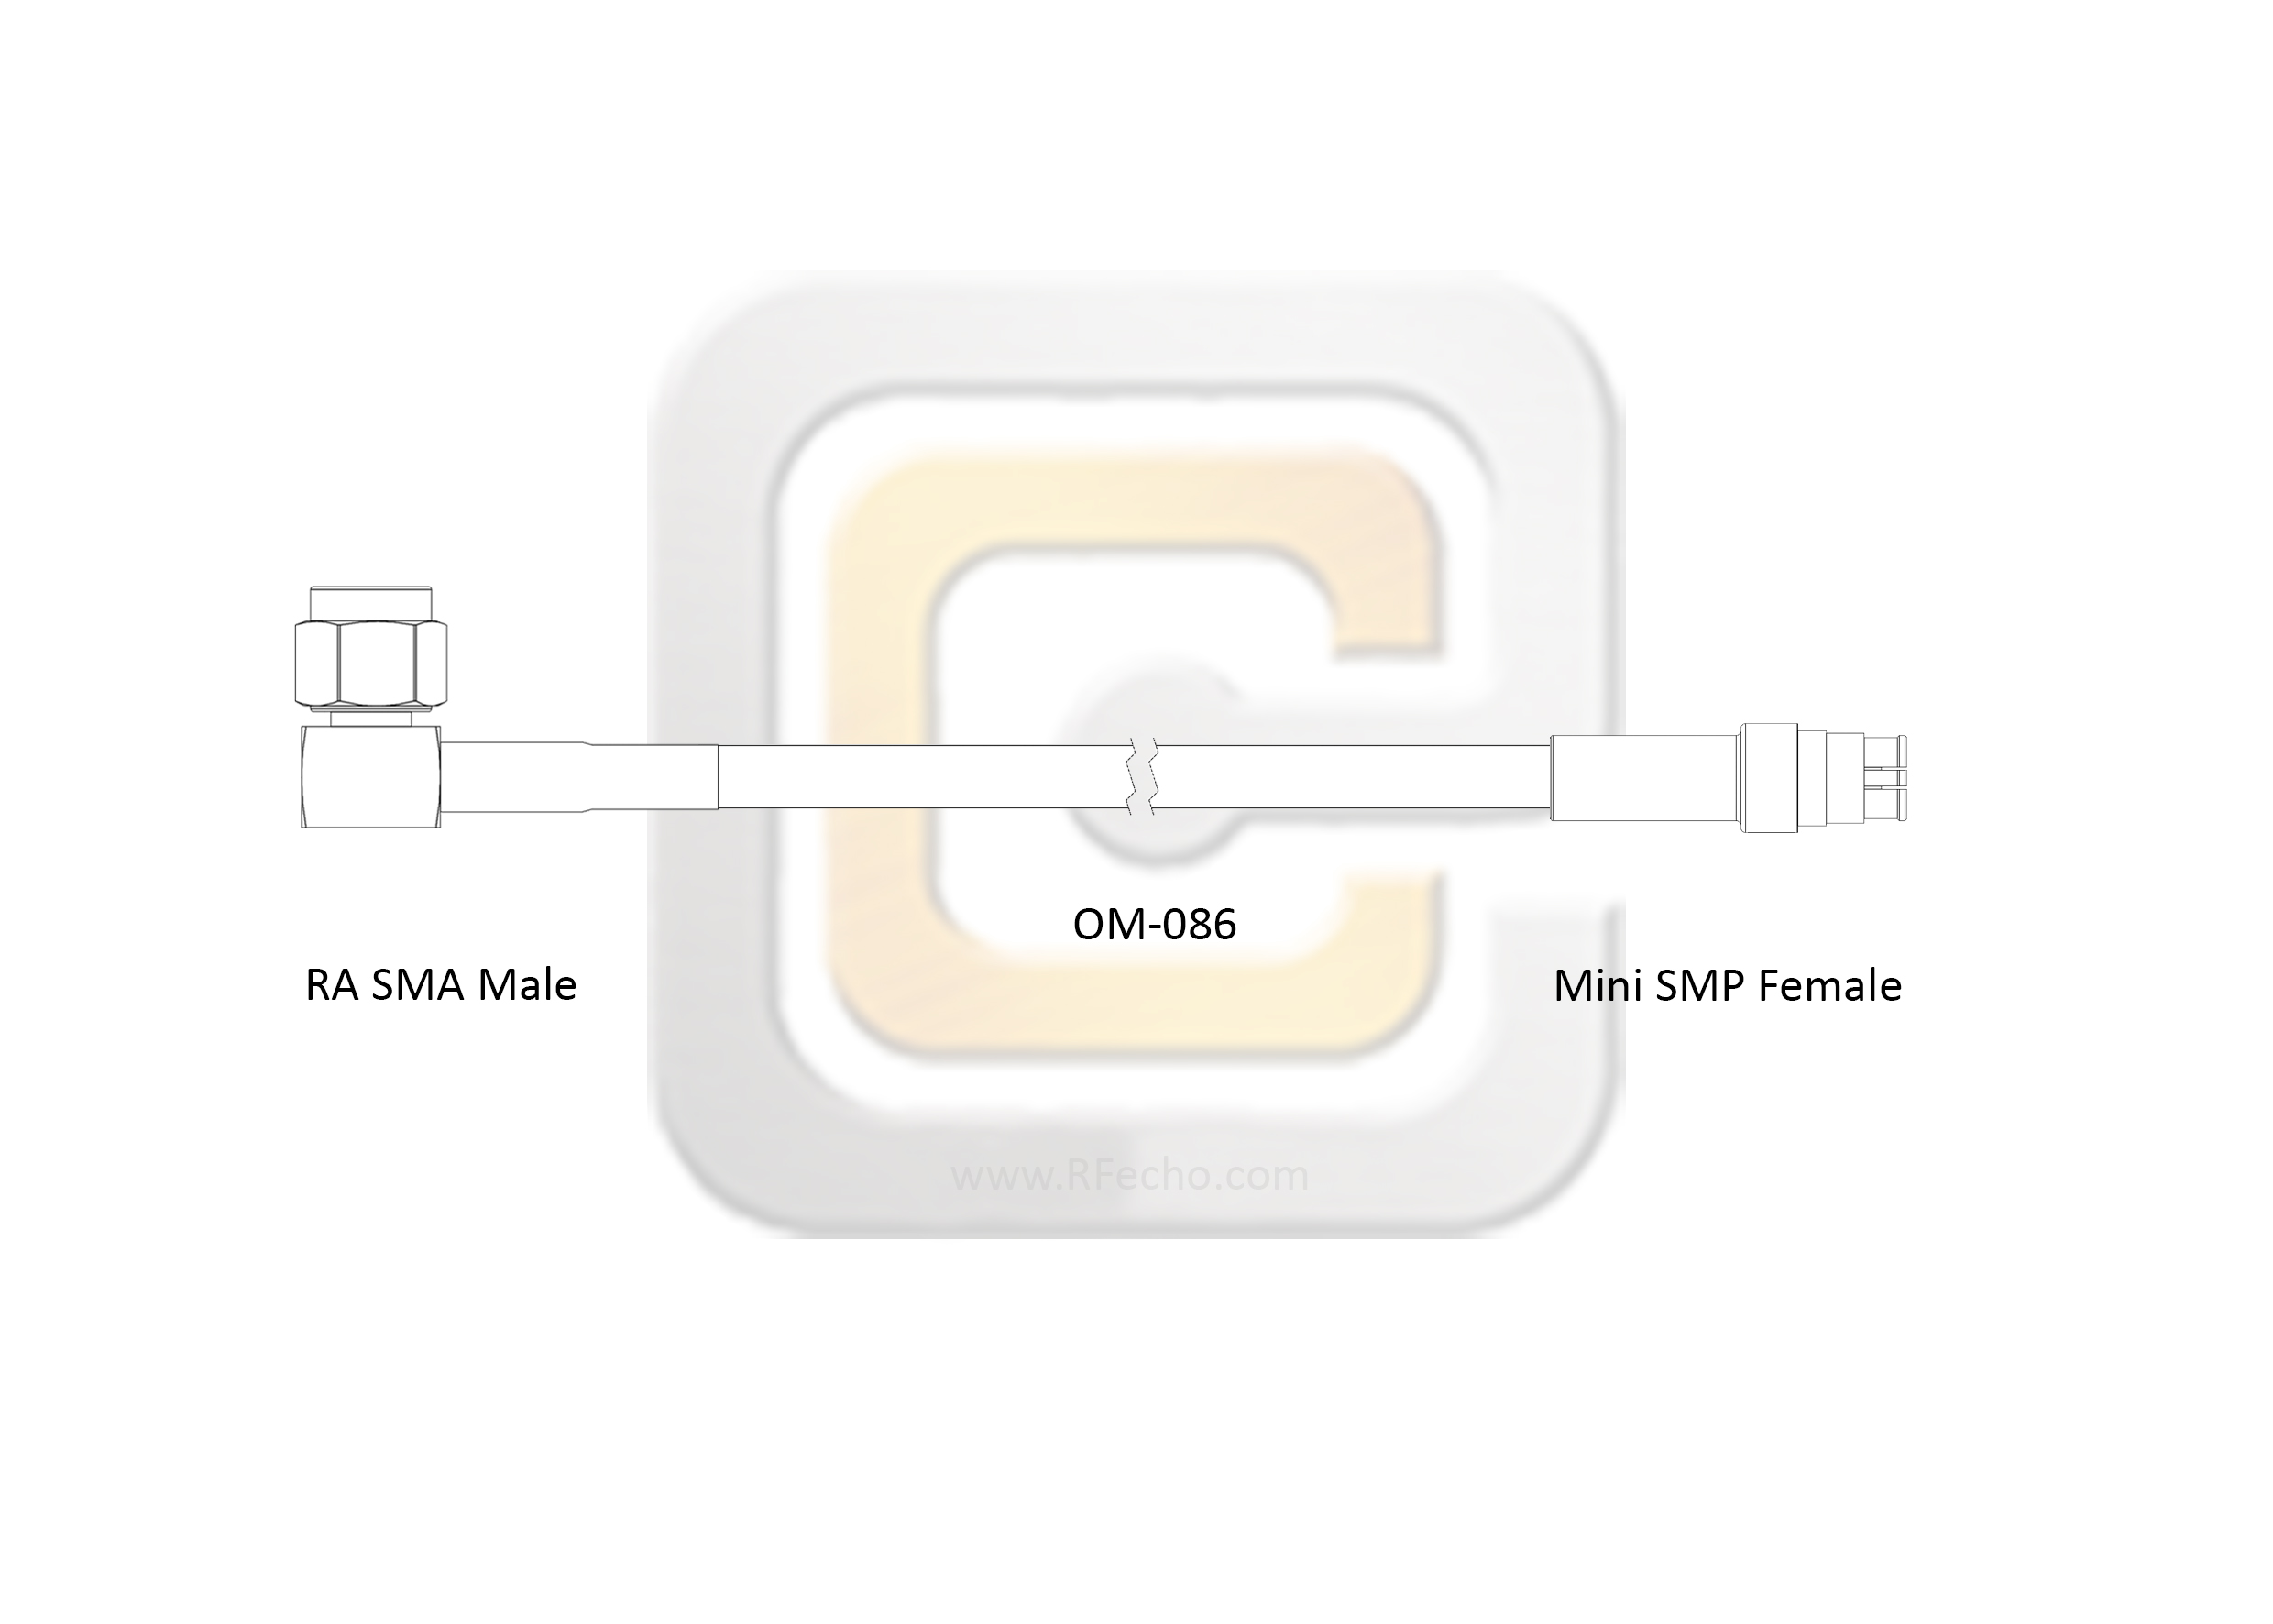 Right Angle SMA Male to Mini SMP Female, 26.5 GHz, OM-086 Coax and RoHS